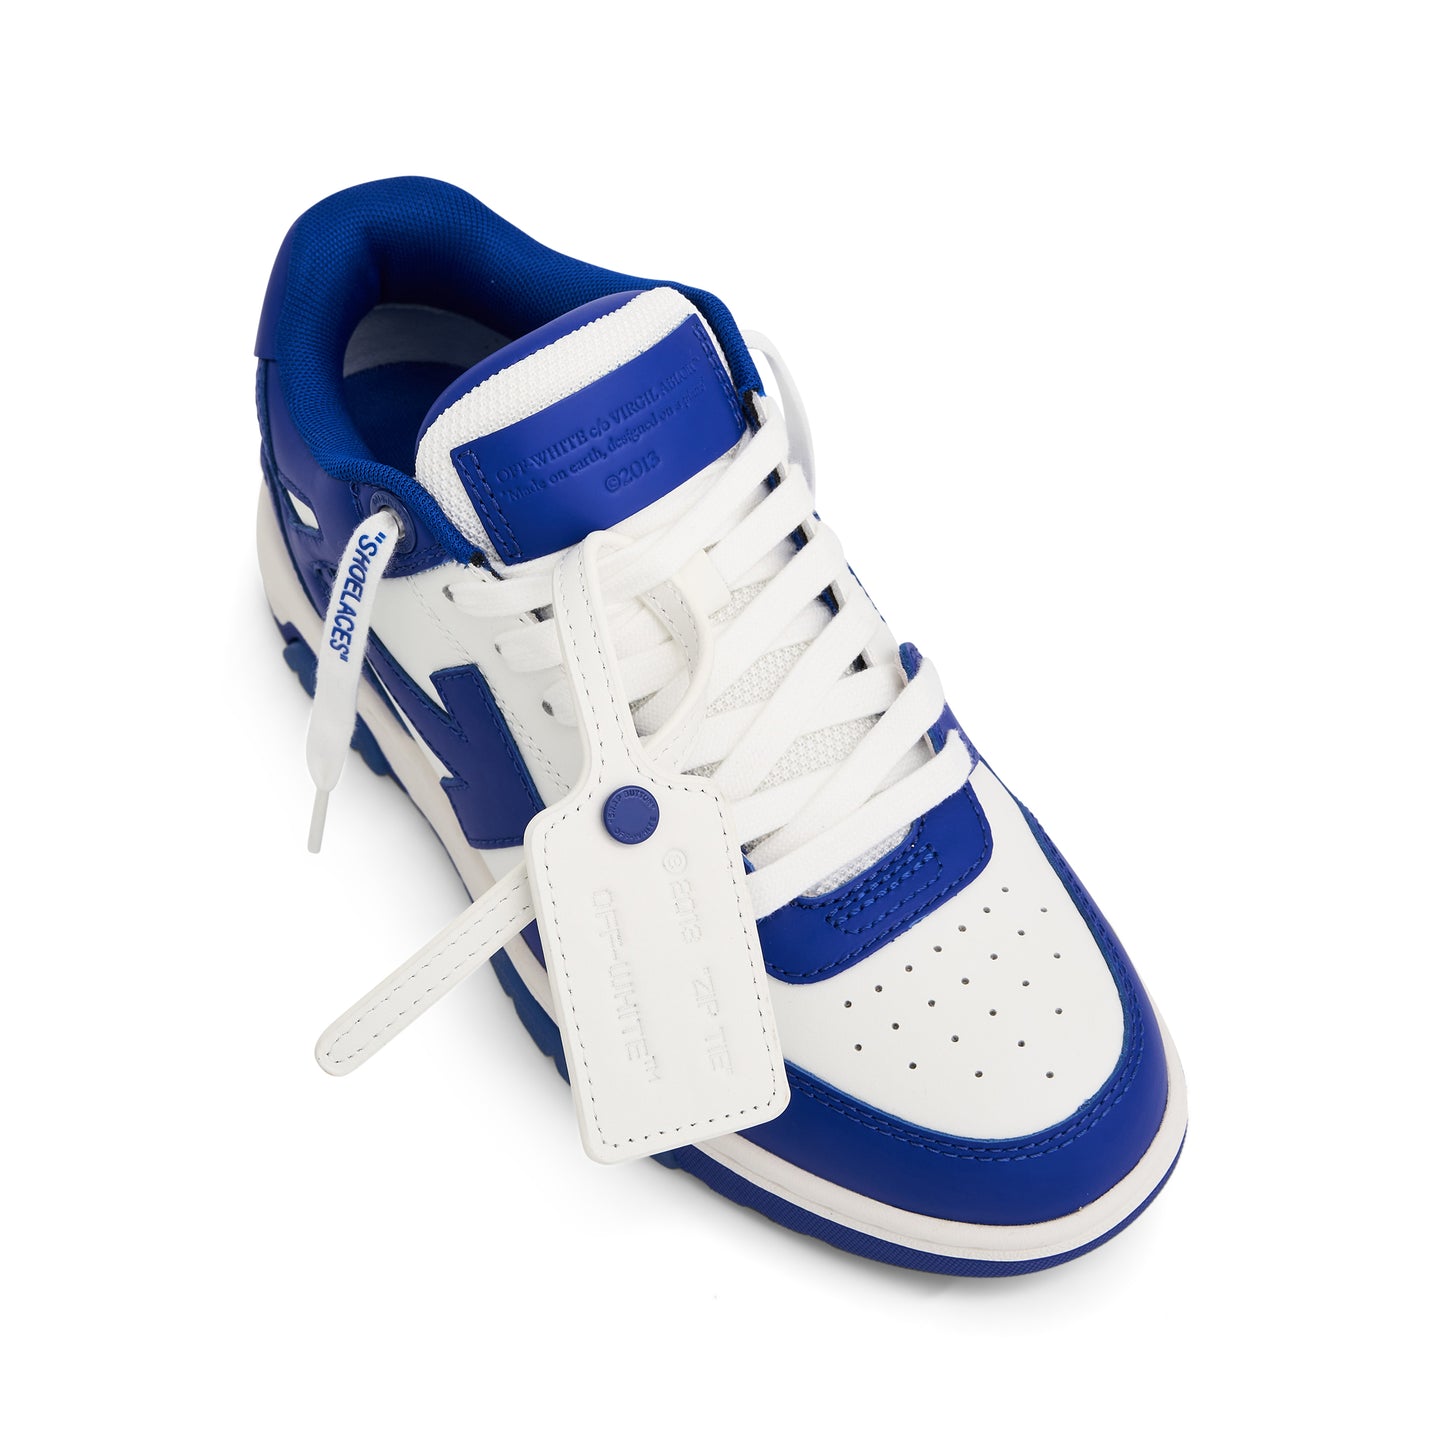 Out of Office Calf Leather Sneaker in White/Blue